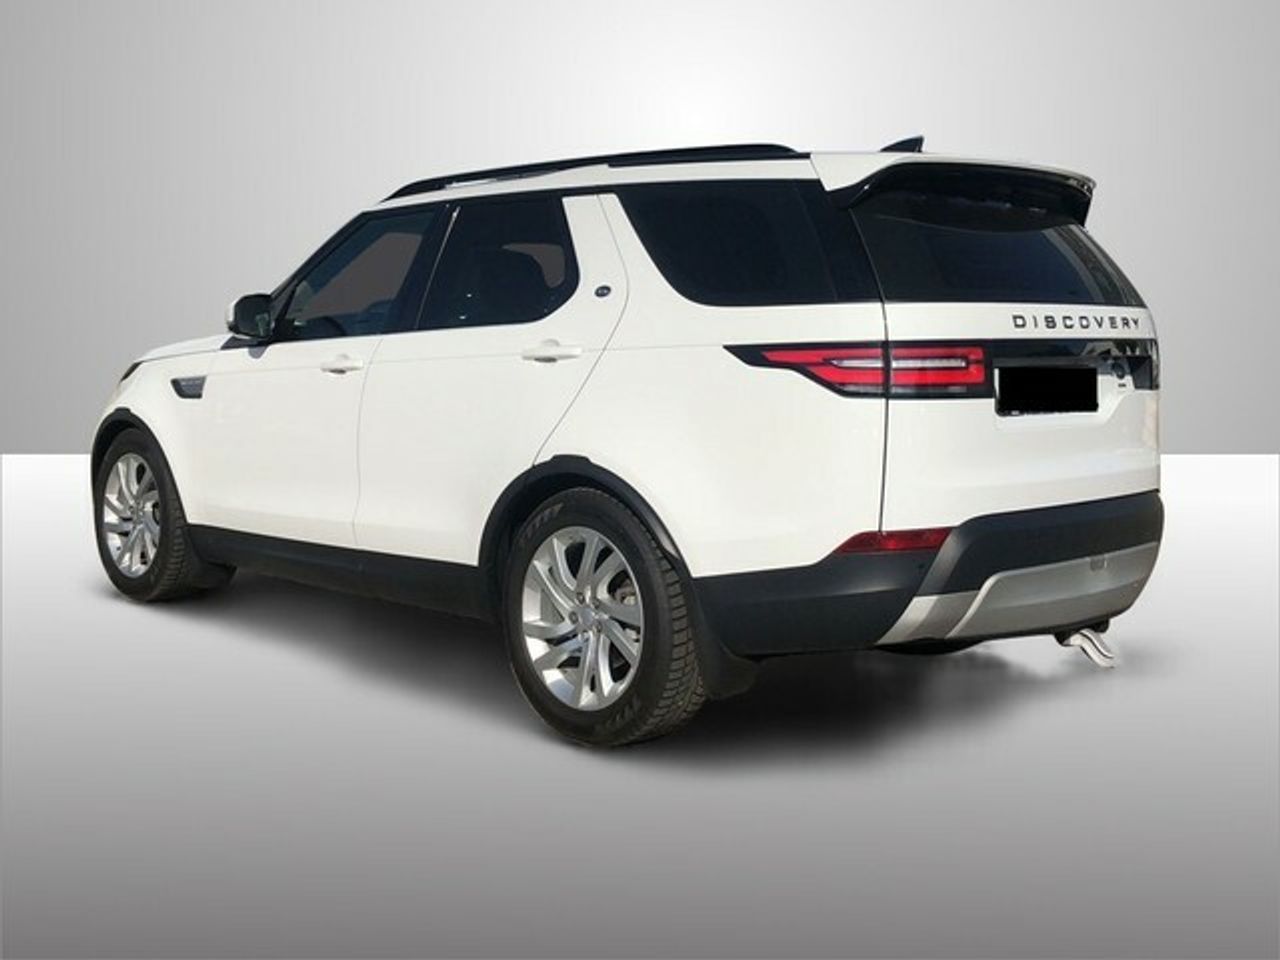 Foto Land-Rover Discovery 24